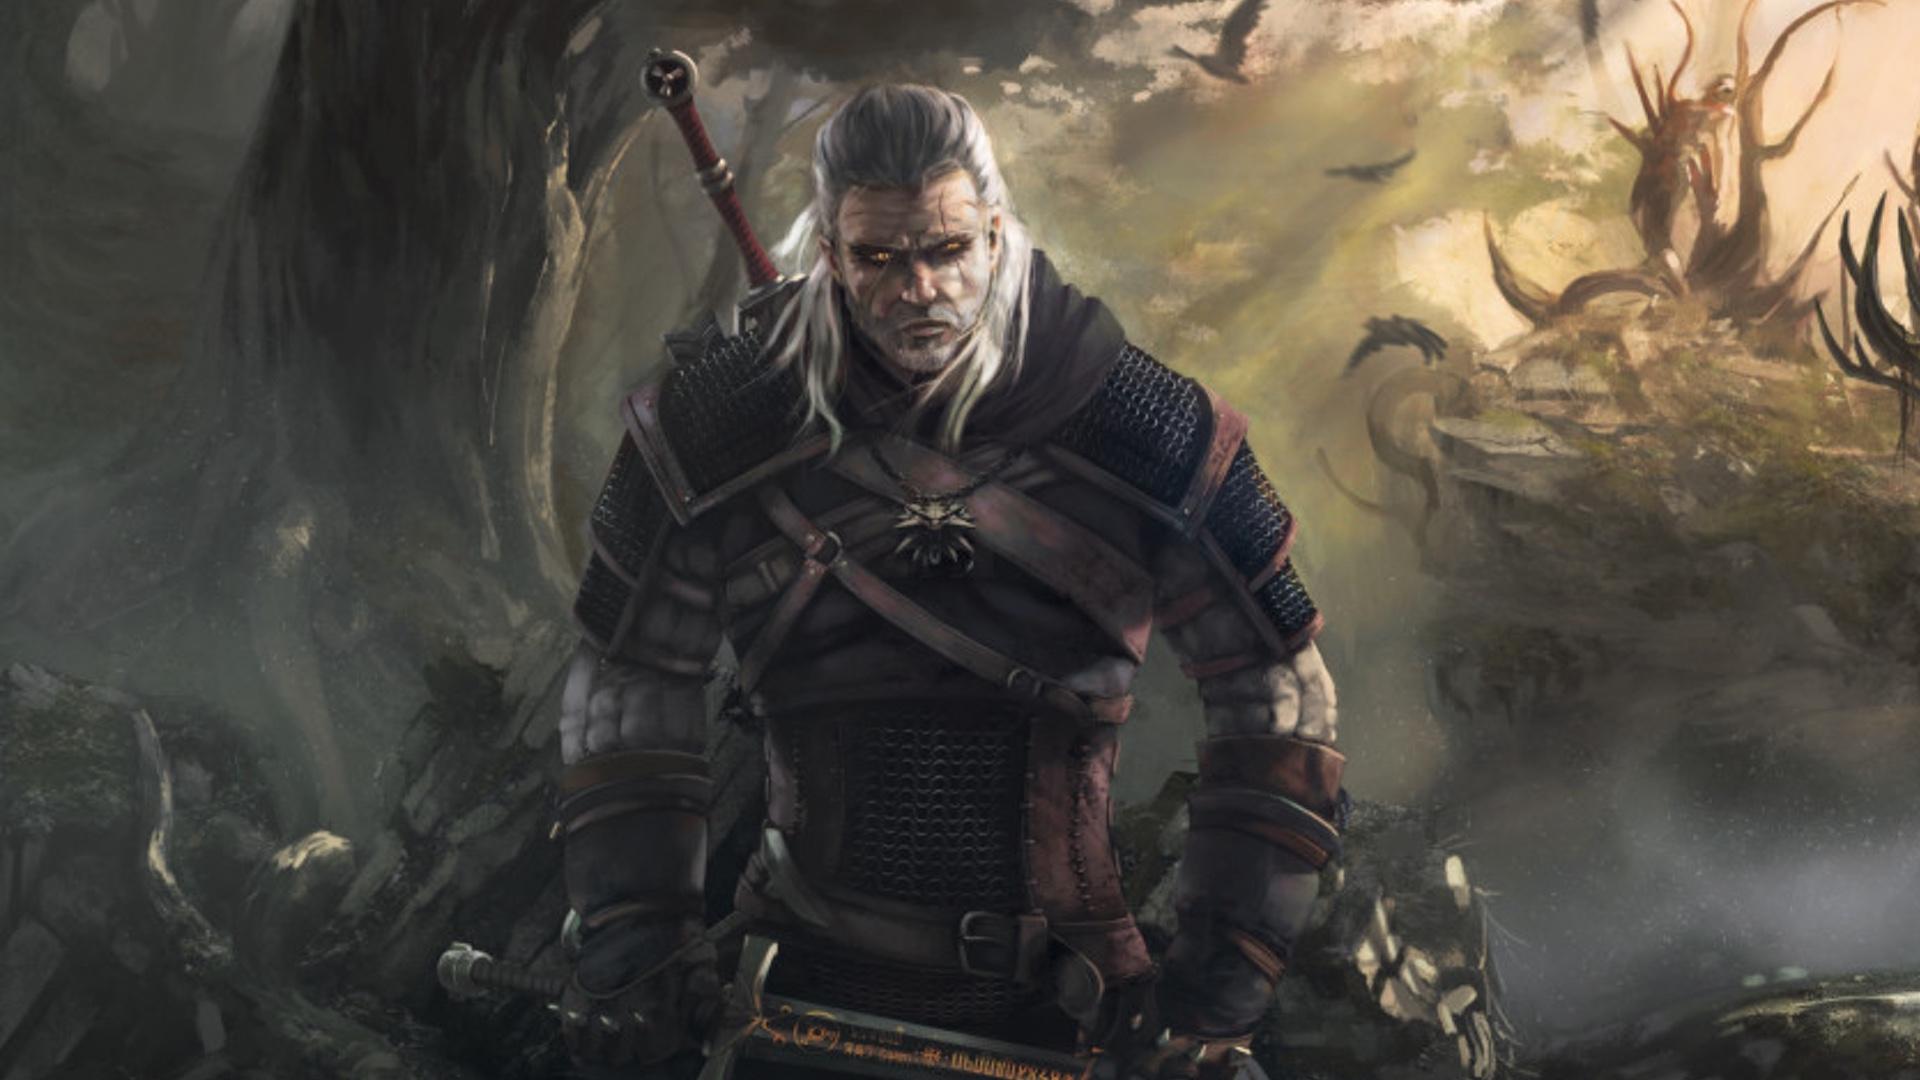 We Won't See Netflix's THE WITCHER Series Until 2020 and it will be